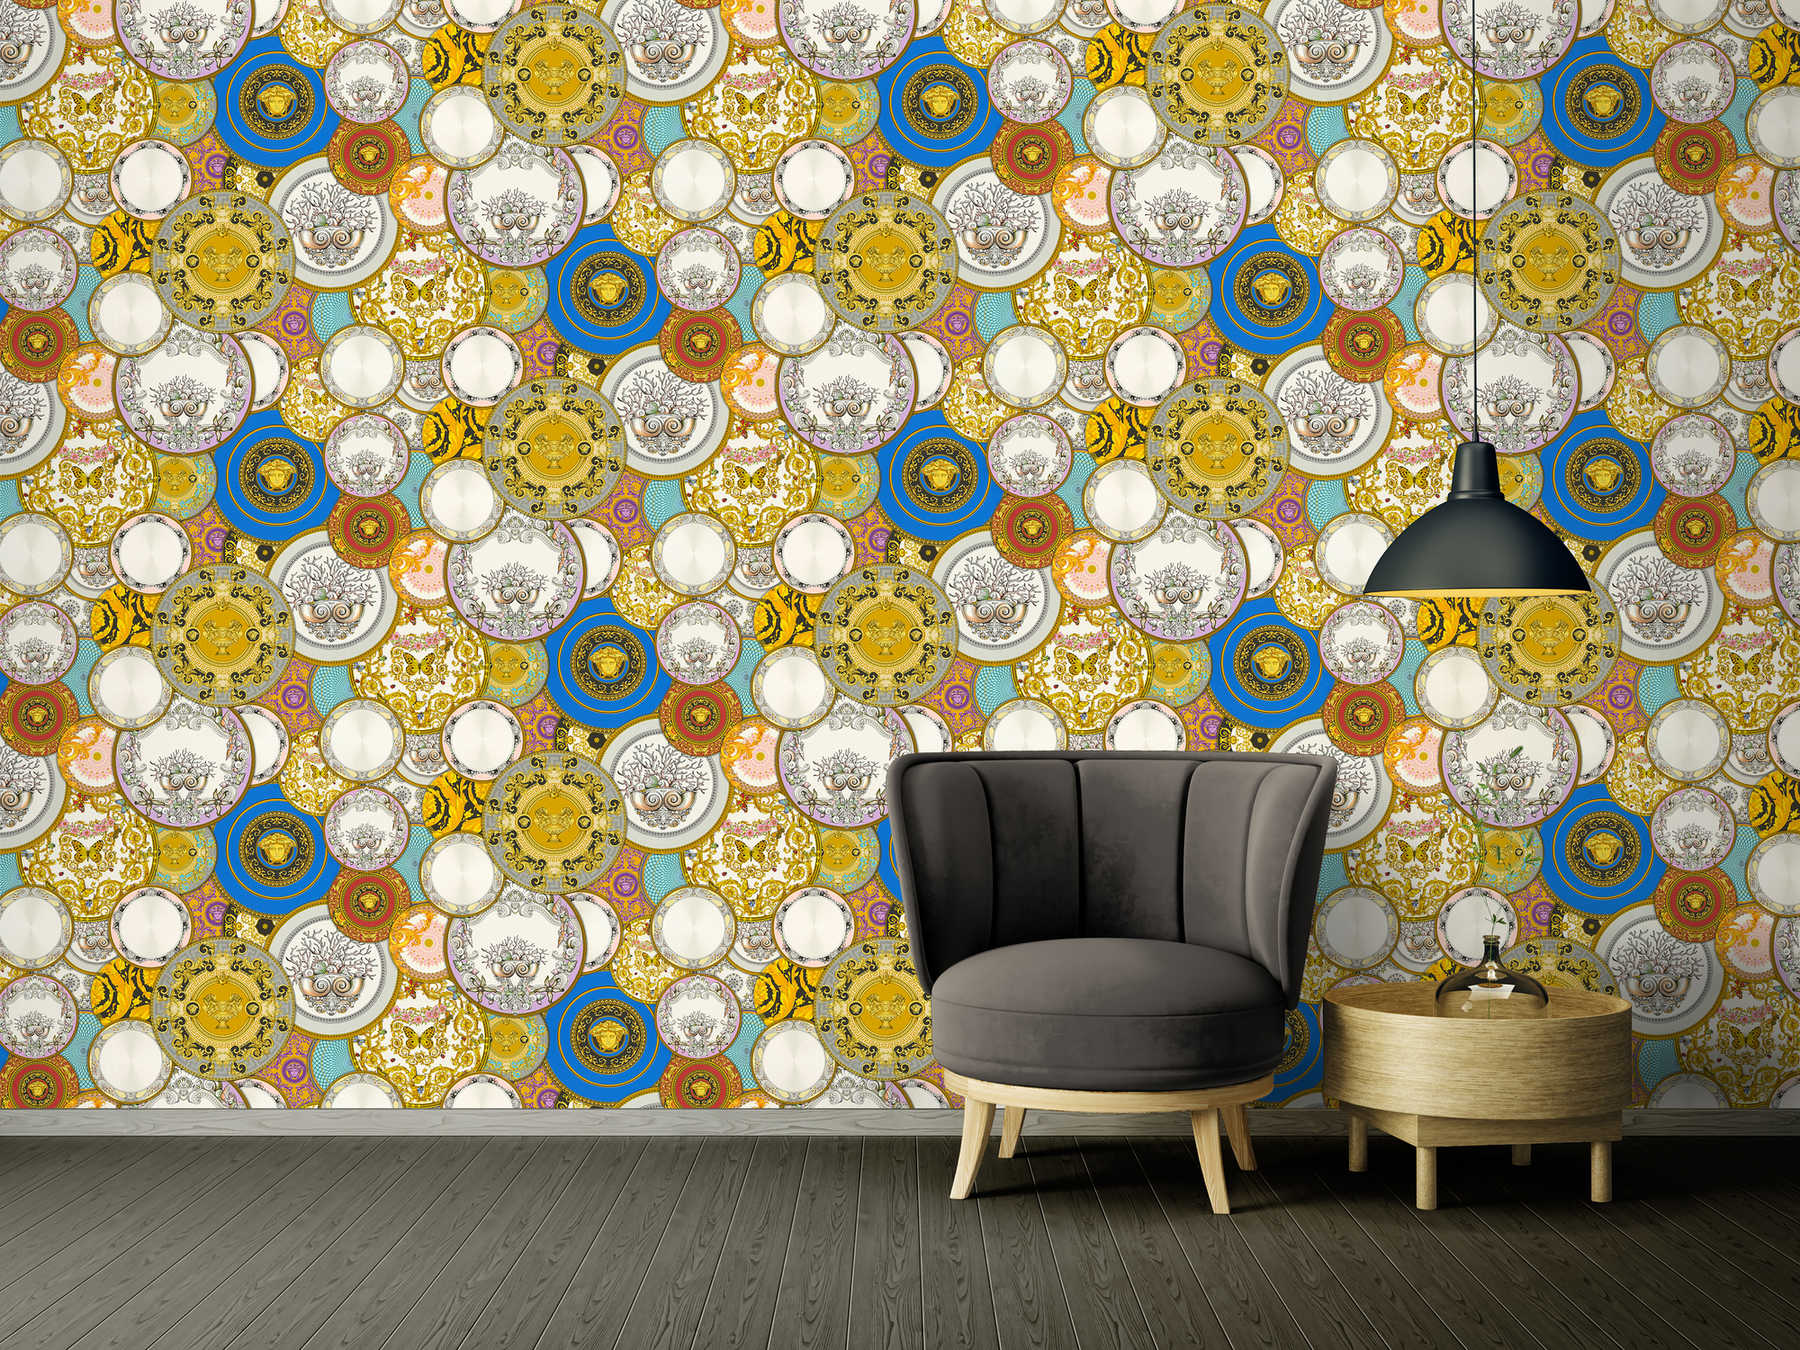             VERSACE wallpaper with medals design & gold effect - Colorful, Metallic
        